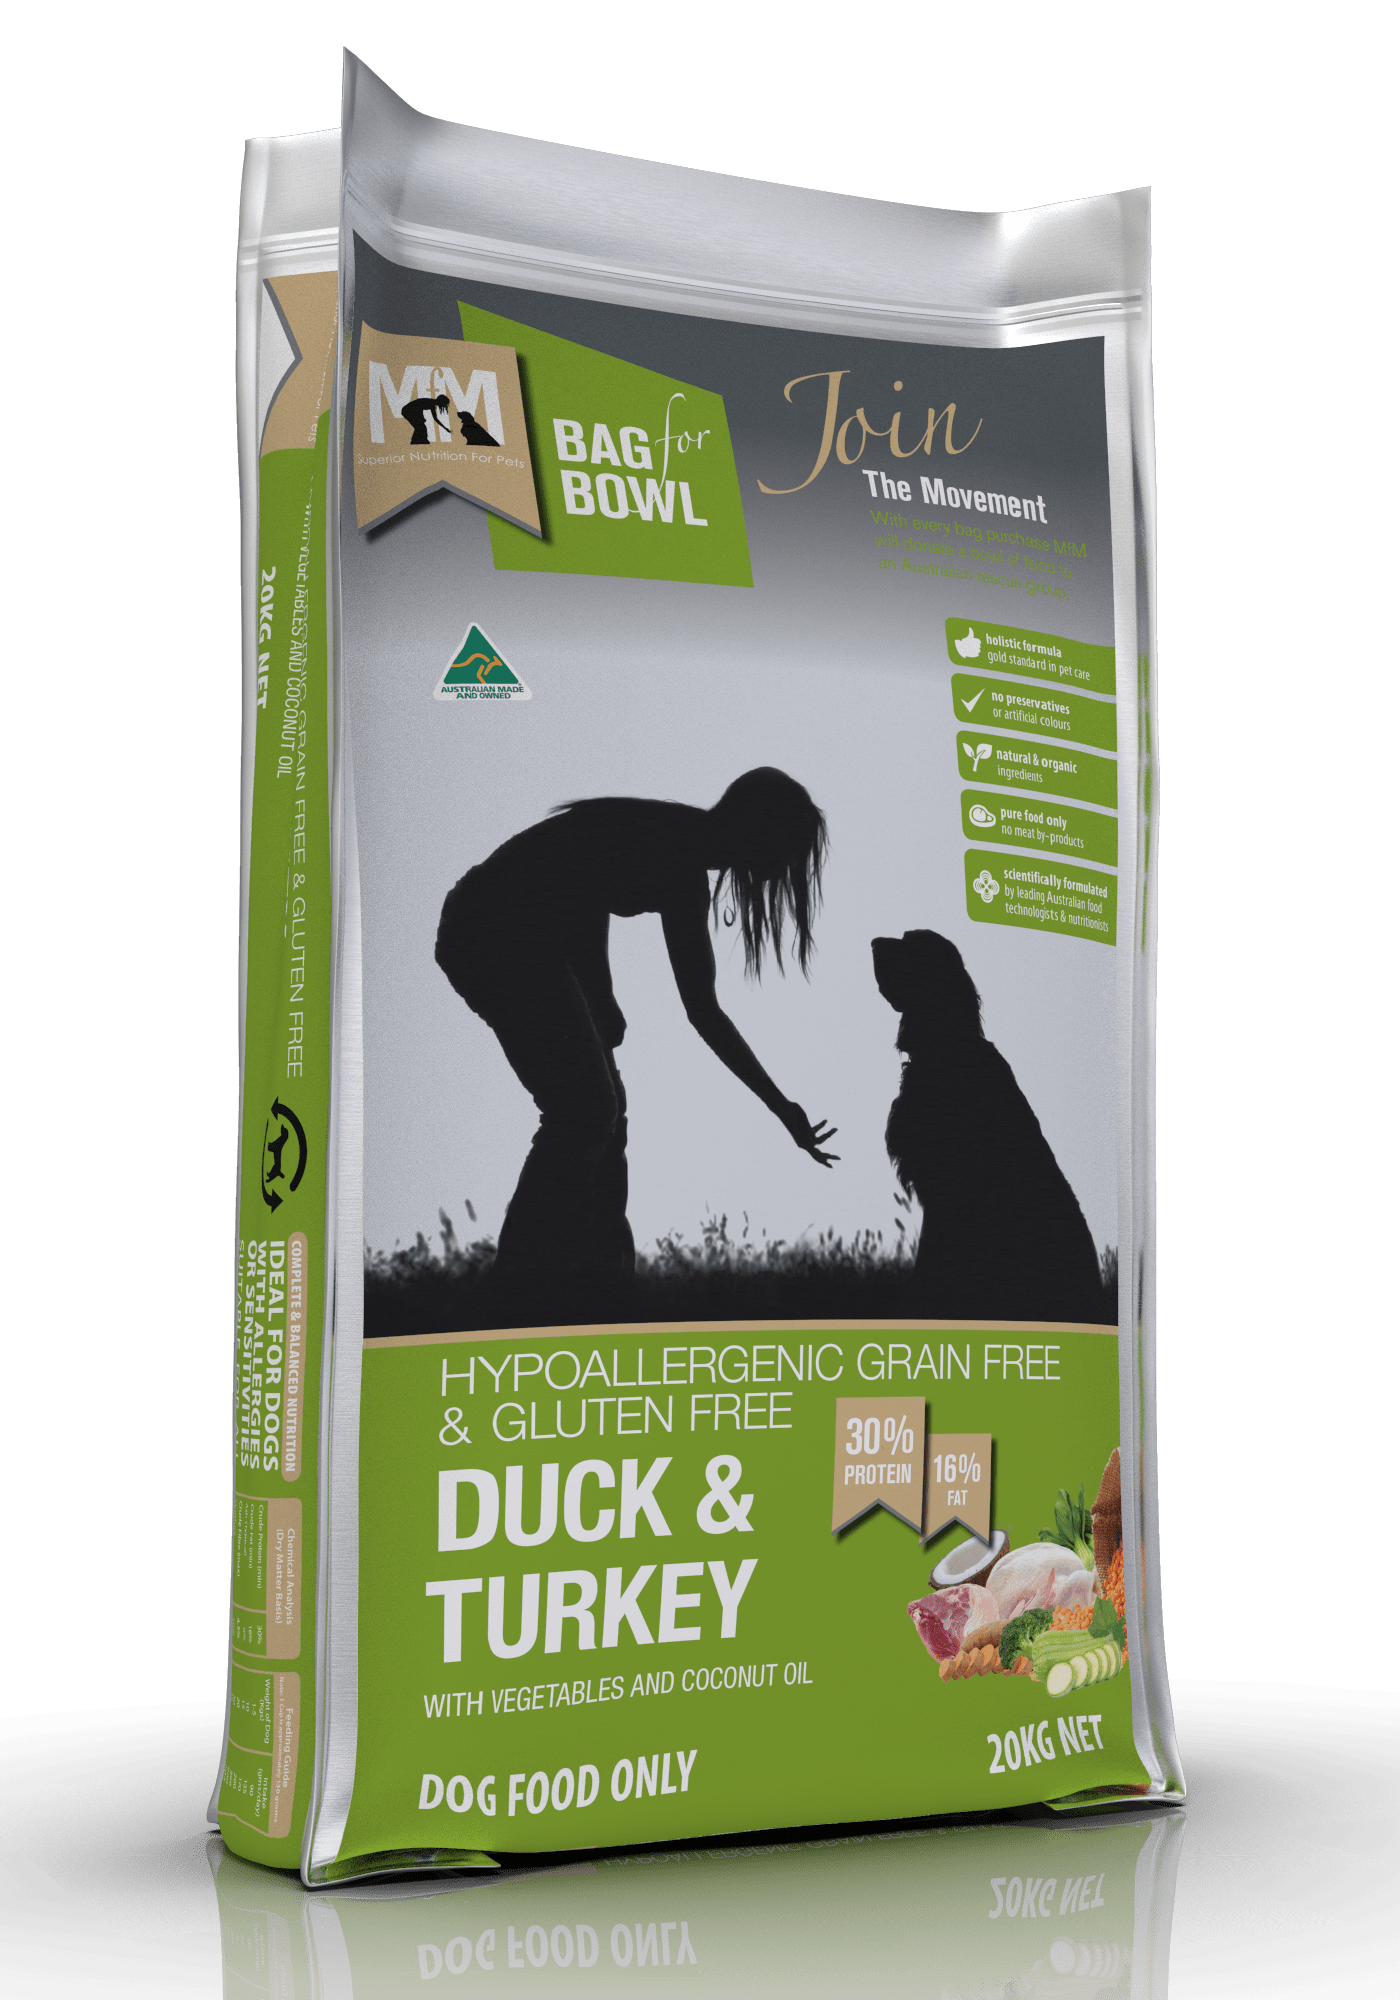 Meals For Mutts Dog Dry Food Default Meals For Mutts Dog Grain Free Duck & Turkey 20Kg